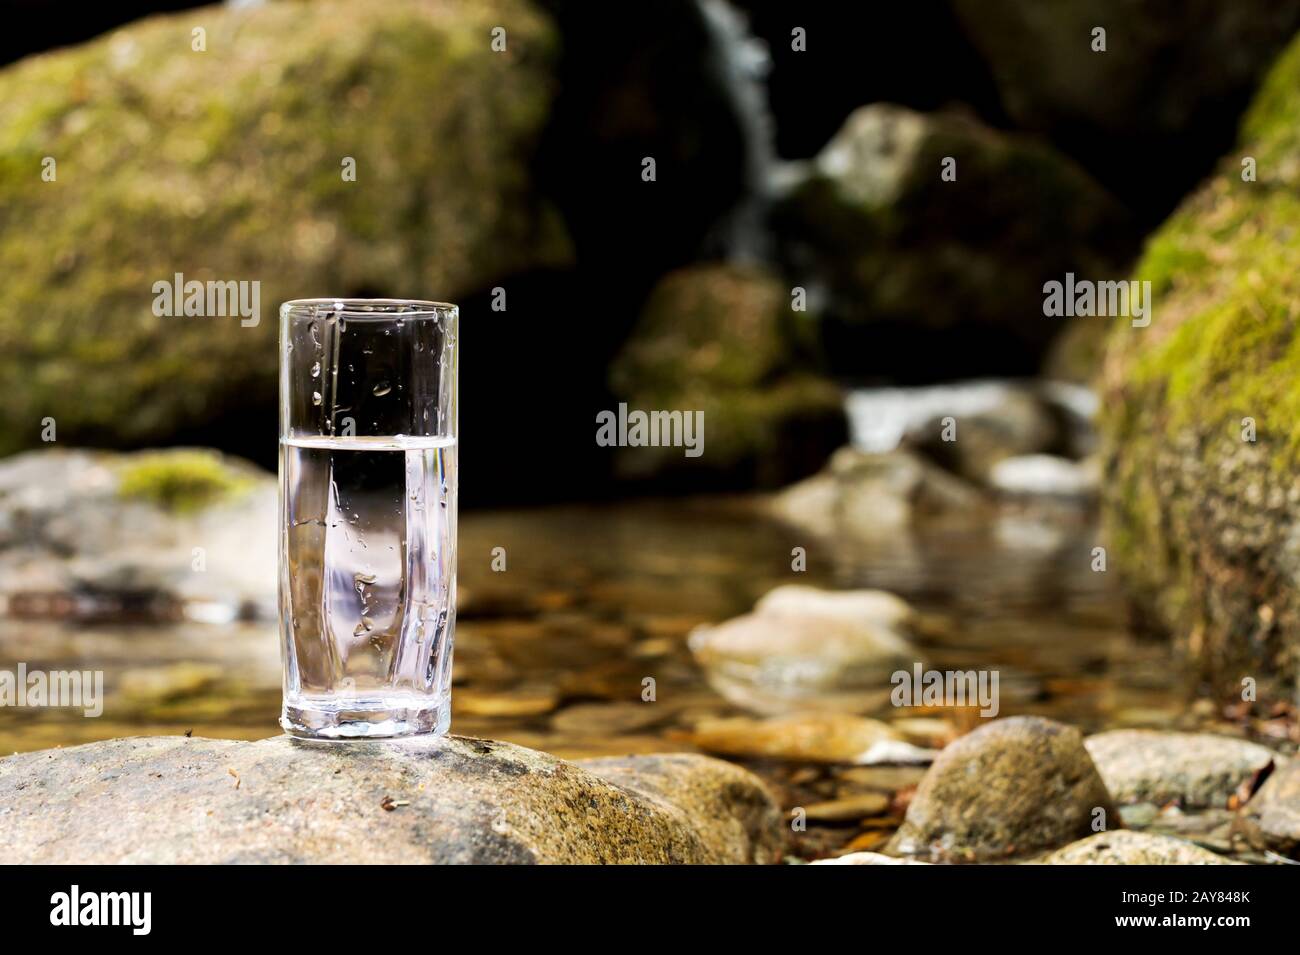 A transparent glass glass with mineral mountain river water stands on a stone beside the mountain river creek Stock Photo